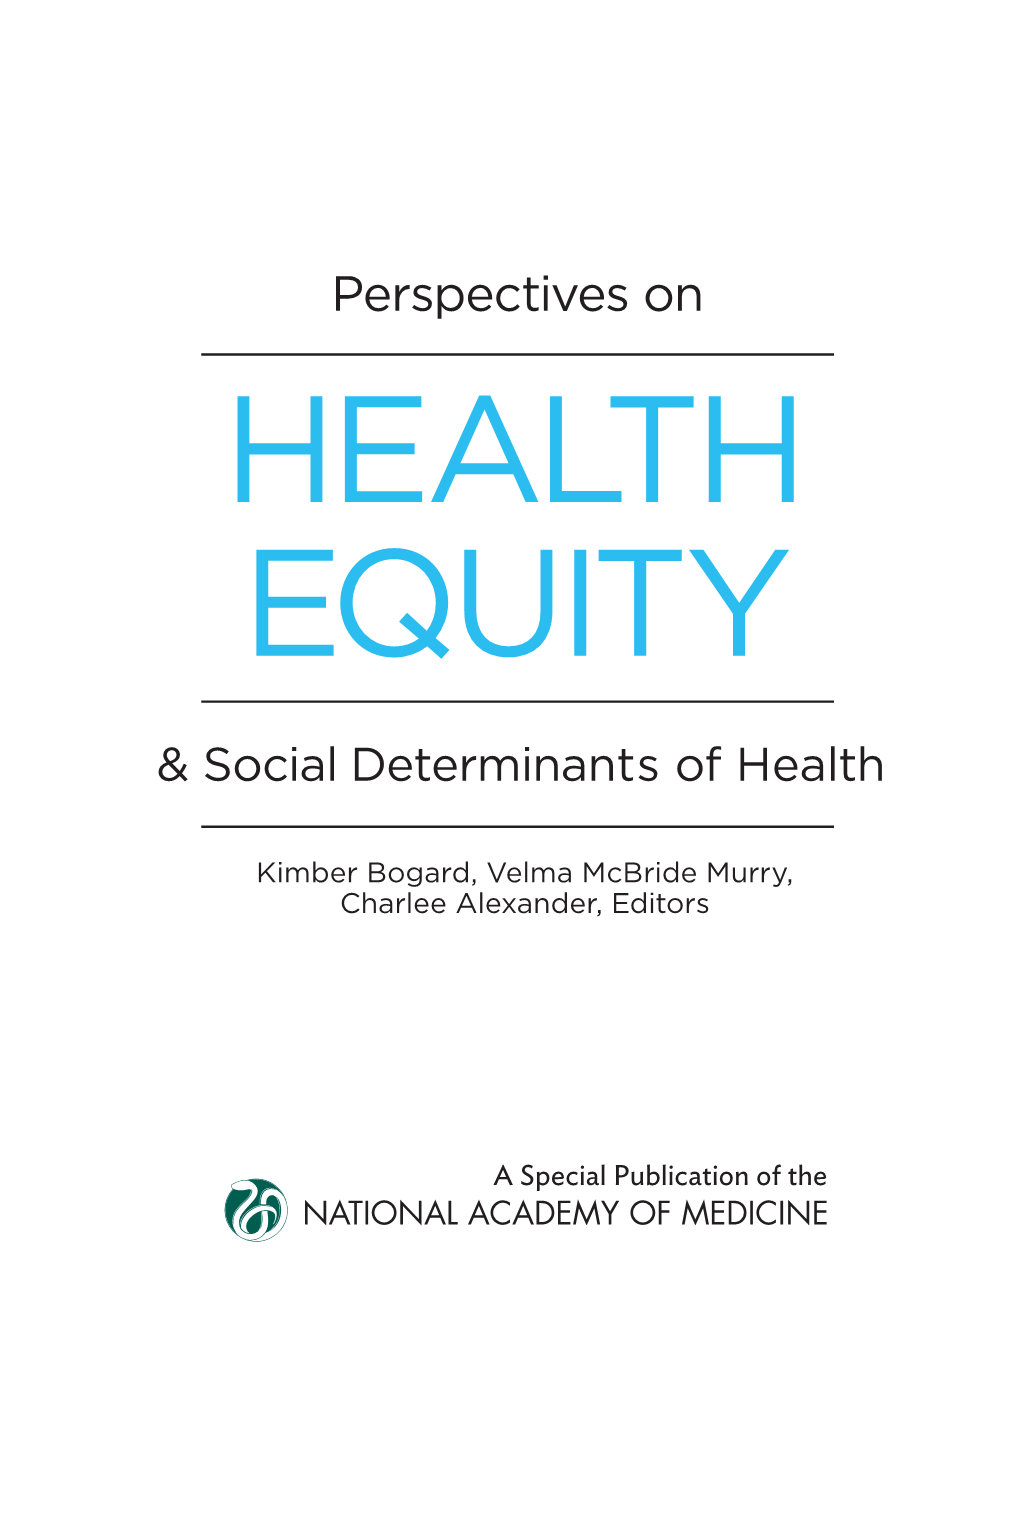 Perspectives on Health Equity and Social Determinants of Health / Kimber Bogard, Velma Mcbride Murry, and Charlee Alexander, Editors